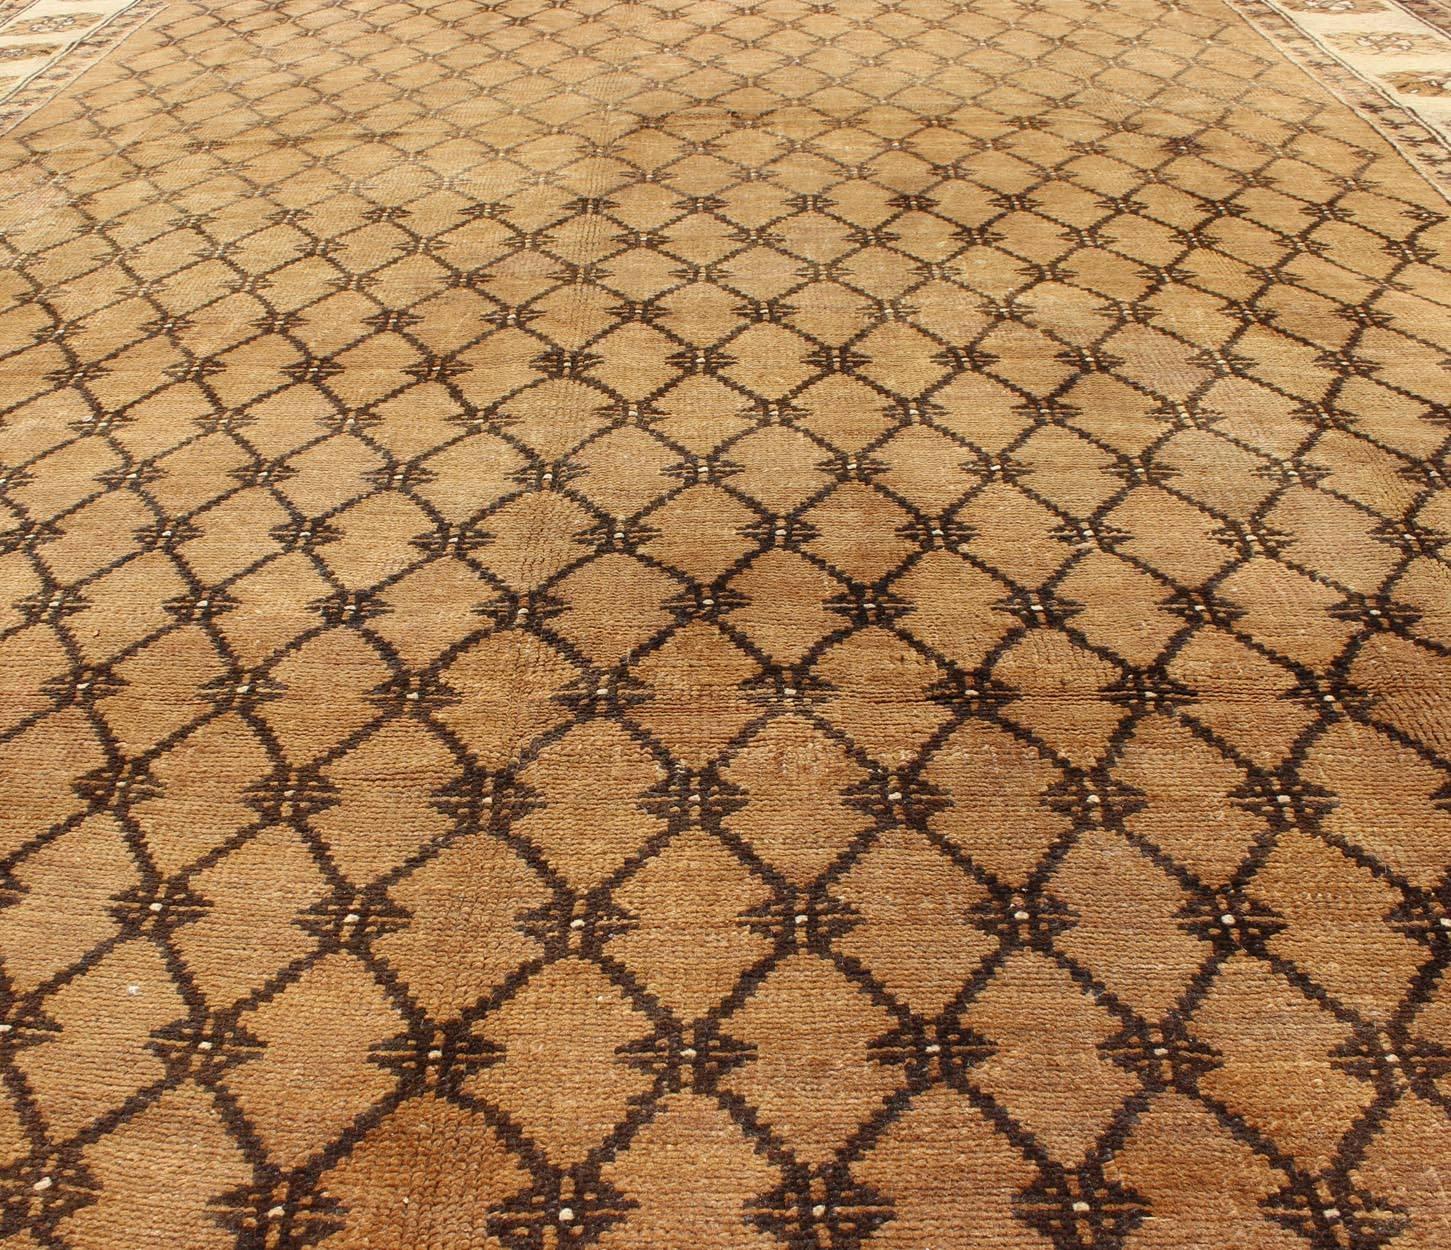 Mid-20th Century Vintage Turkish Rug with Modern Design in Brown, Mocha and Cream